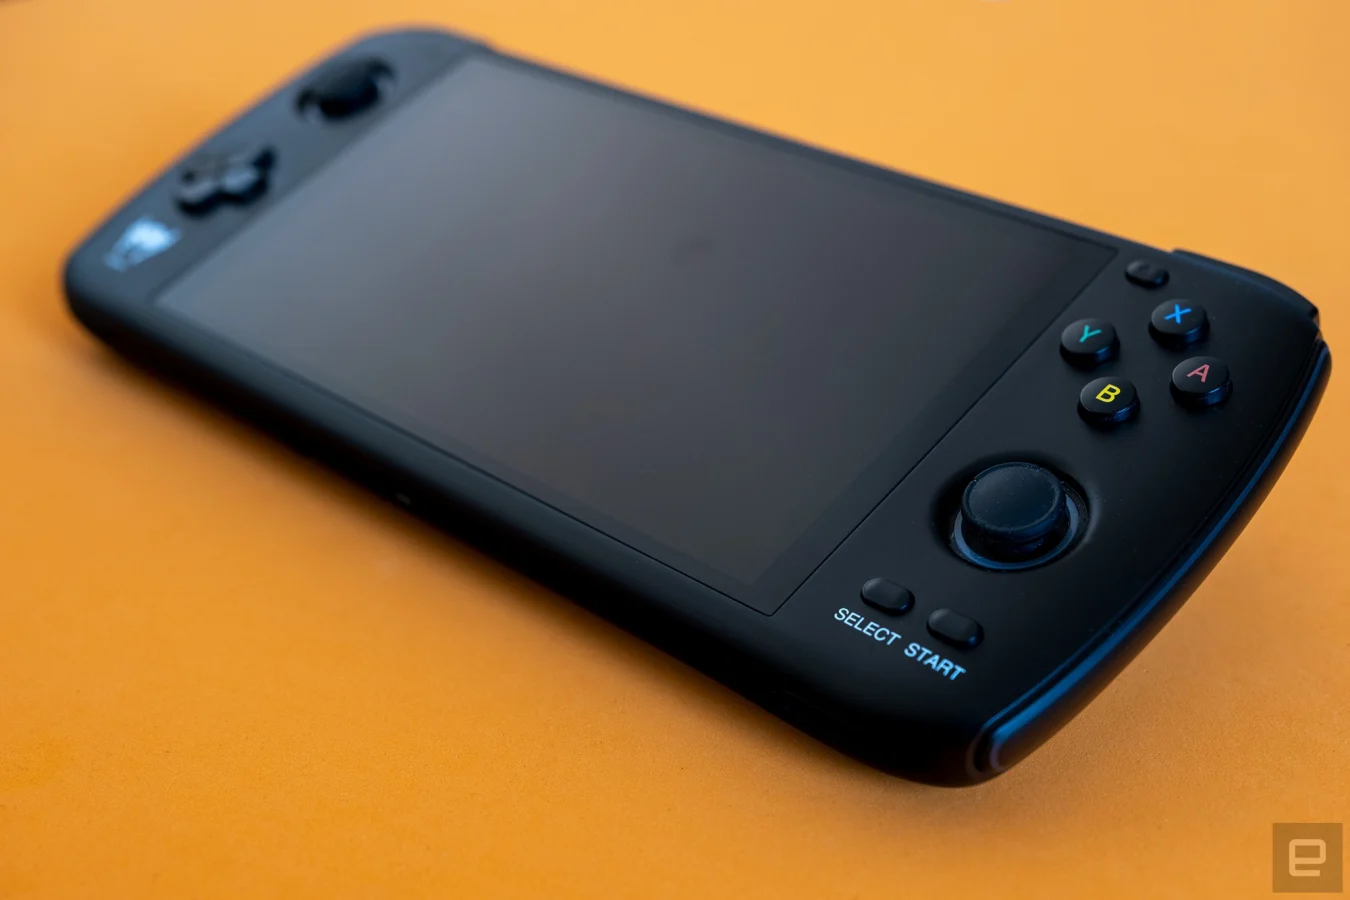 The new retro handheld from Ayn, called the Odin, is pictured with a close up of the main buttons and analog stick.